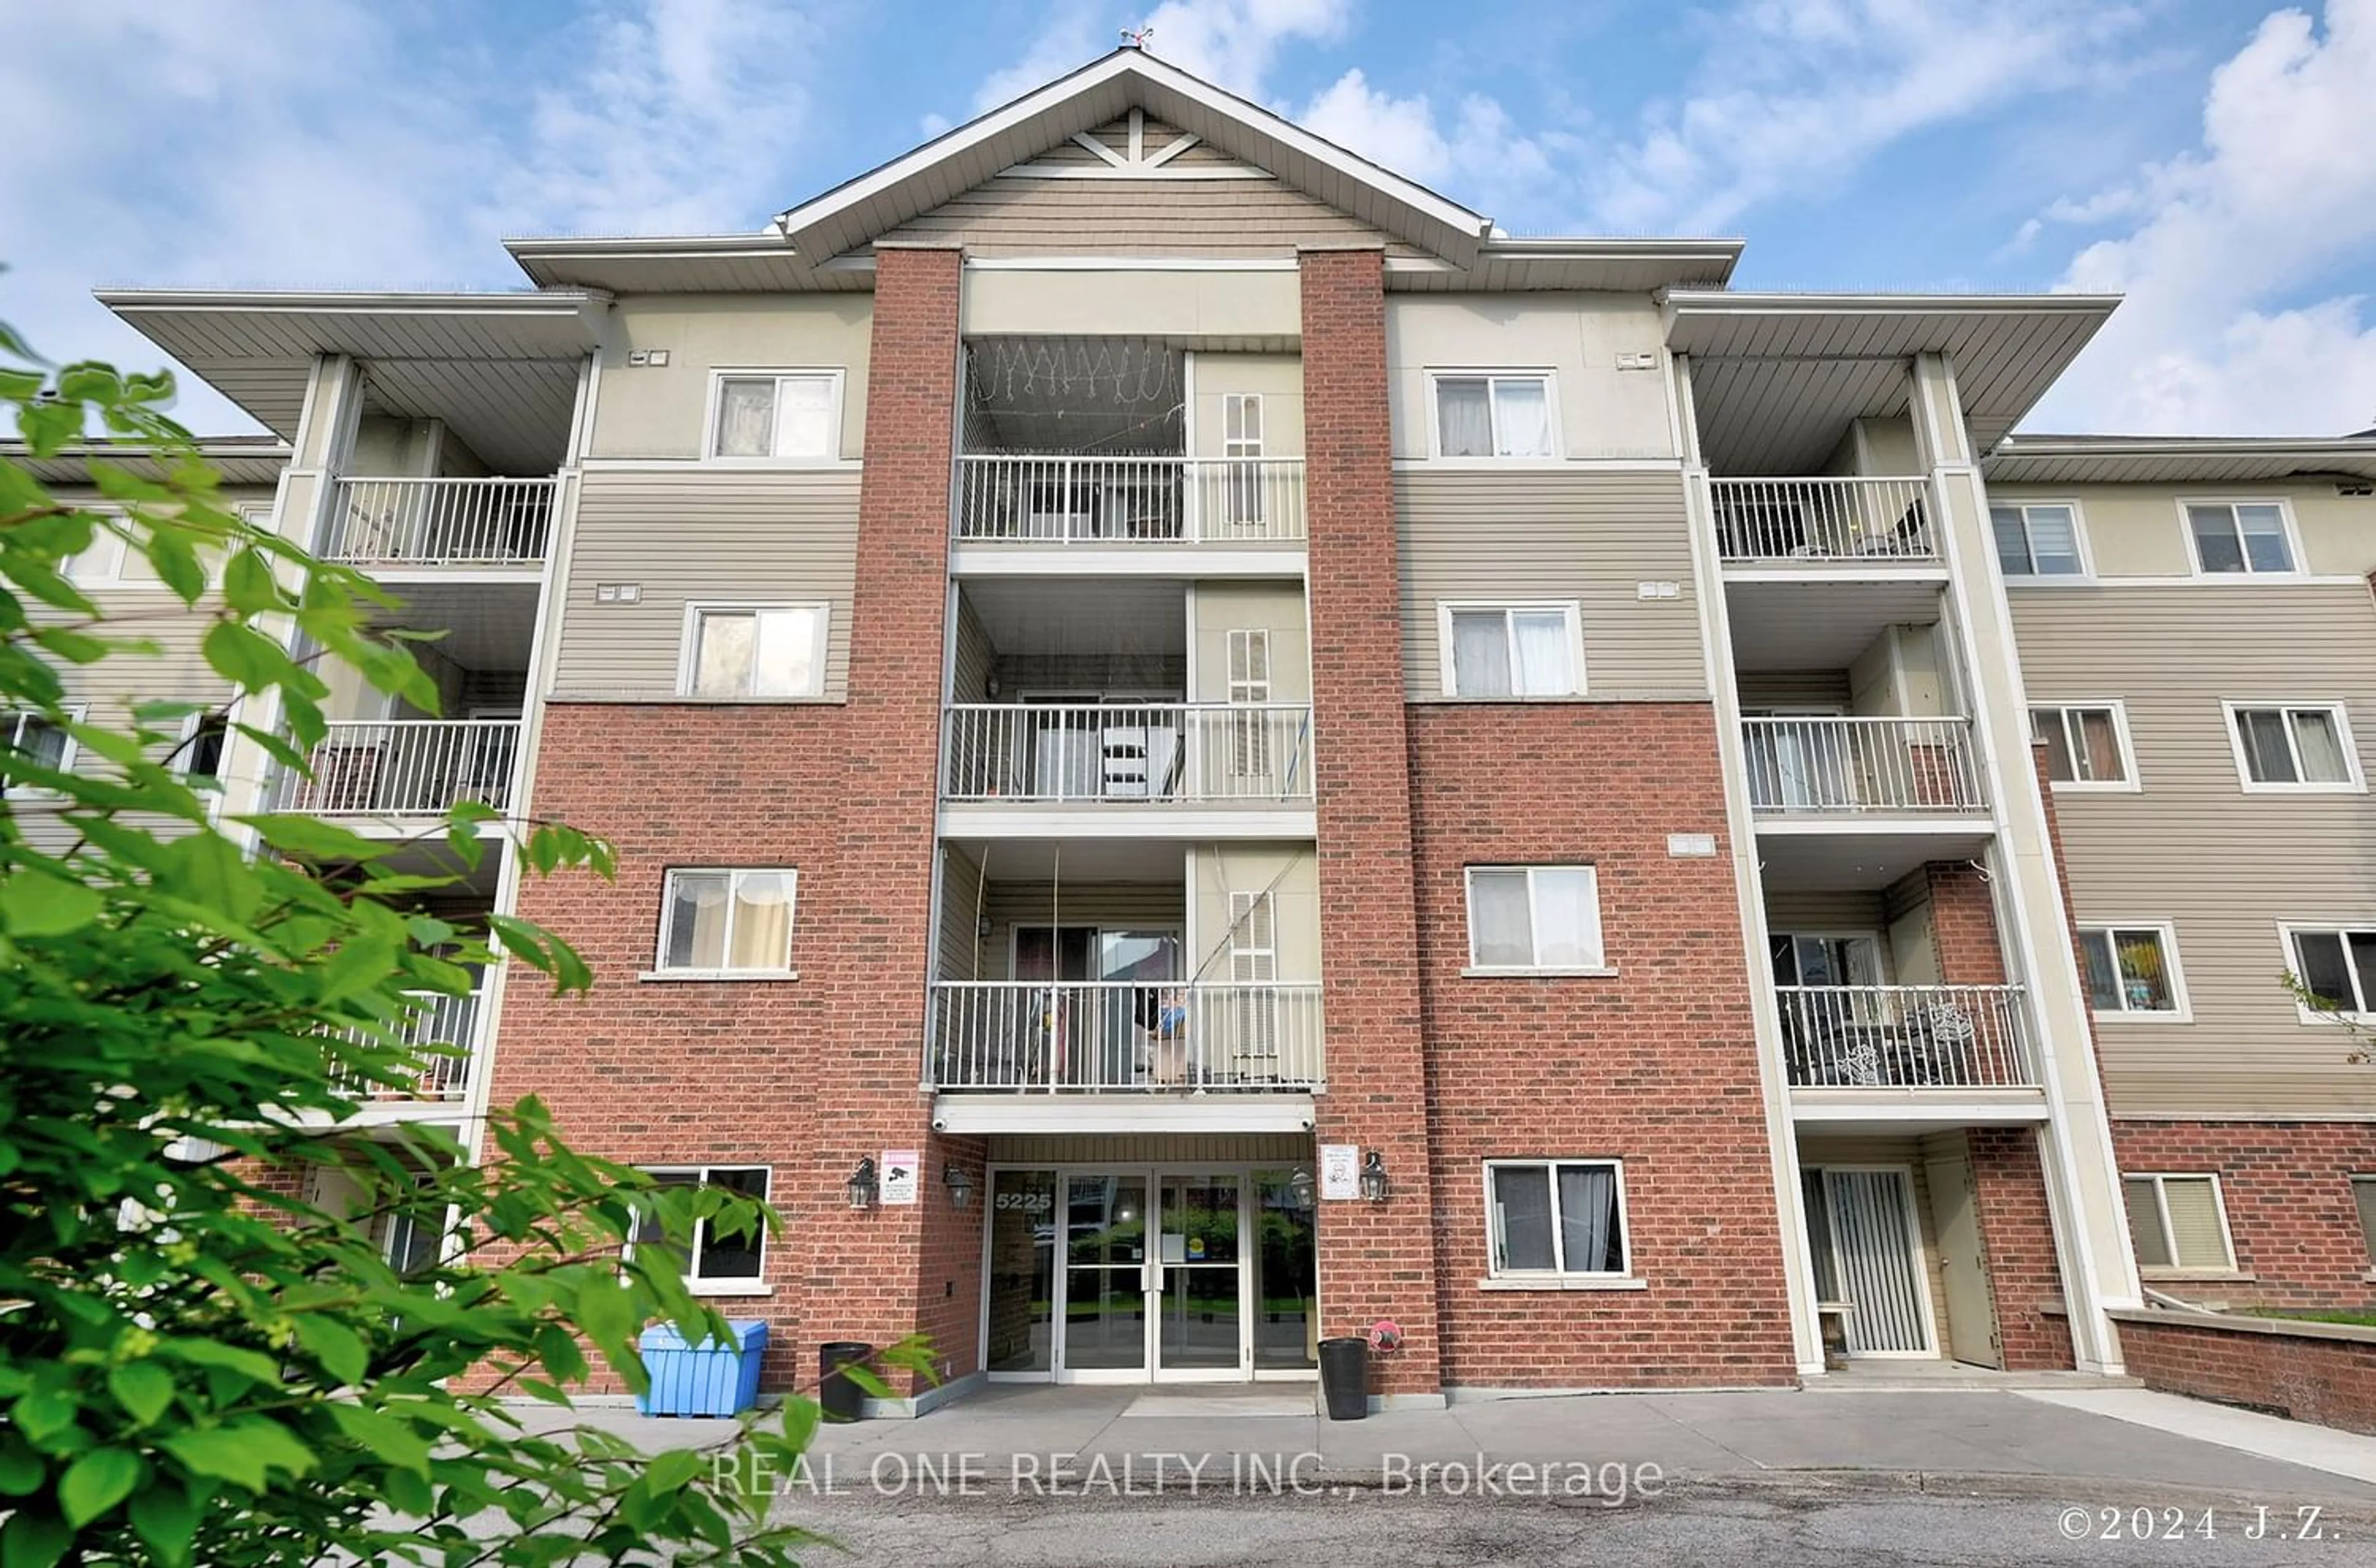 A pic from exterior of the house or condo for 5225 Finch Ave #109, Toronto Ontario M1S 5W8